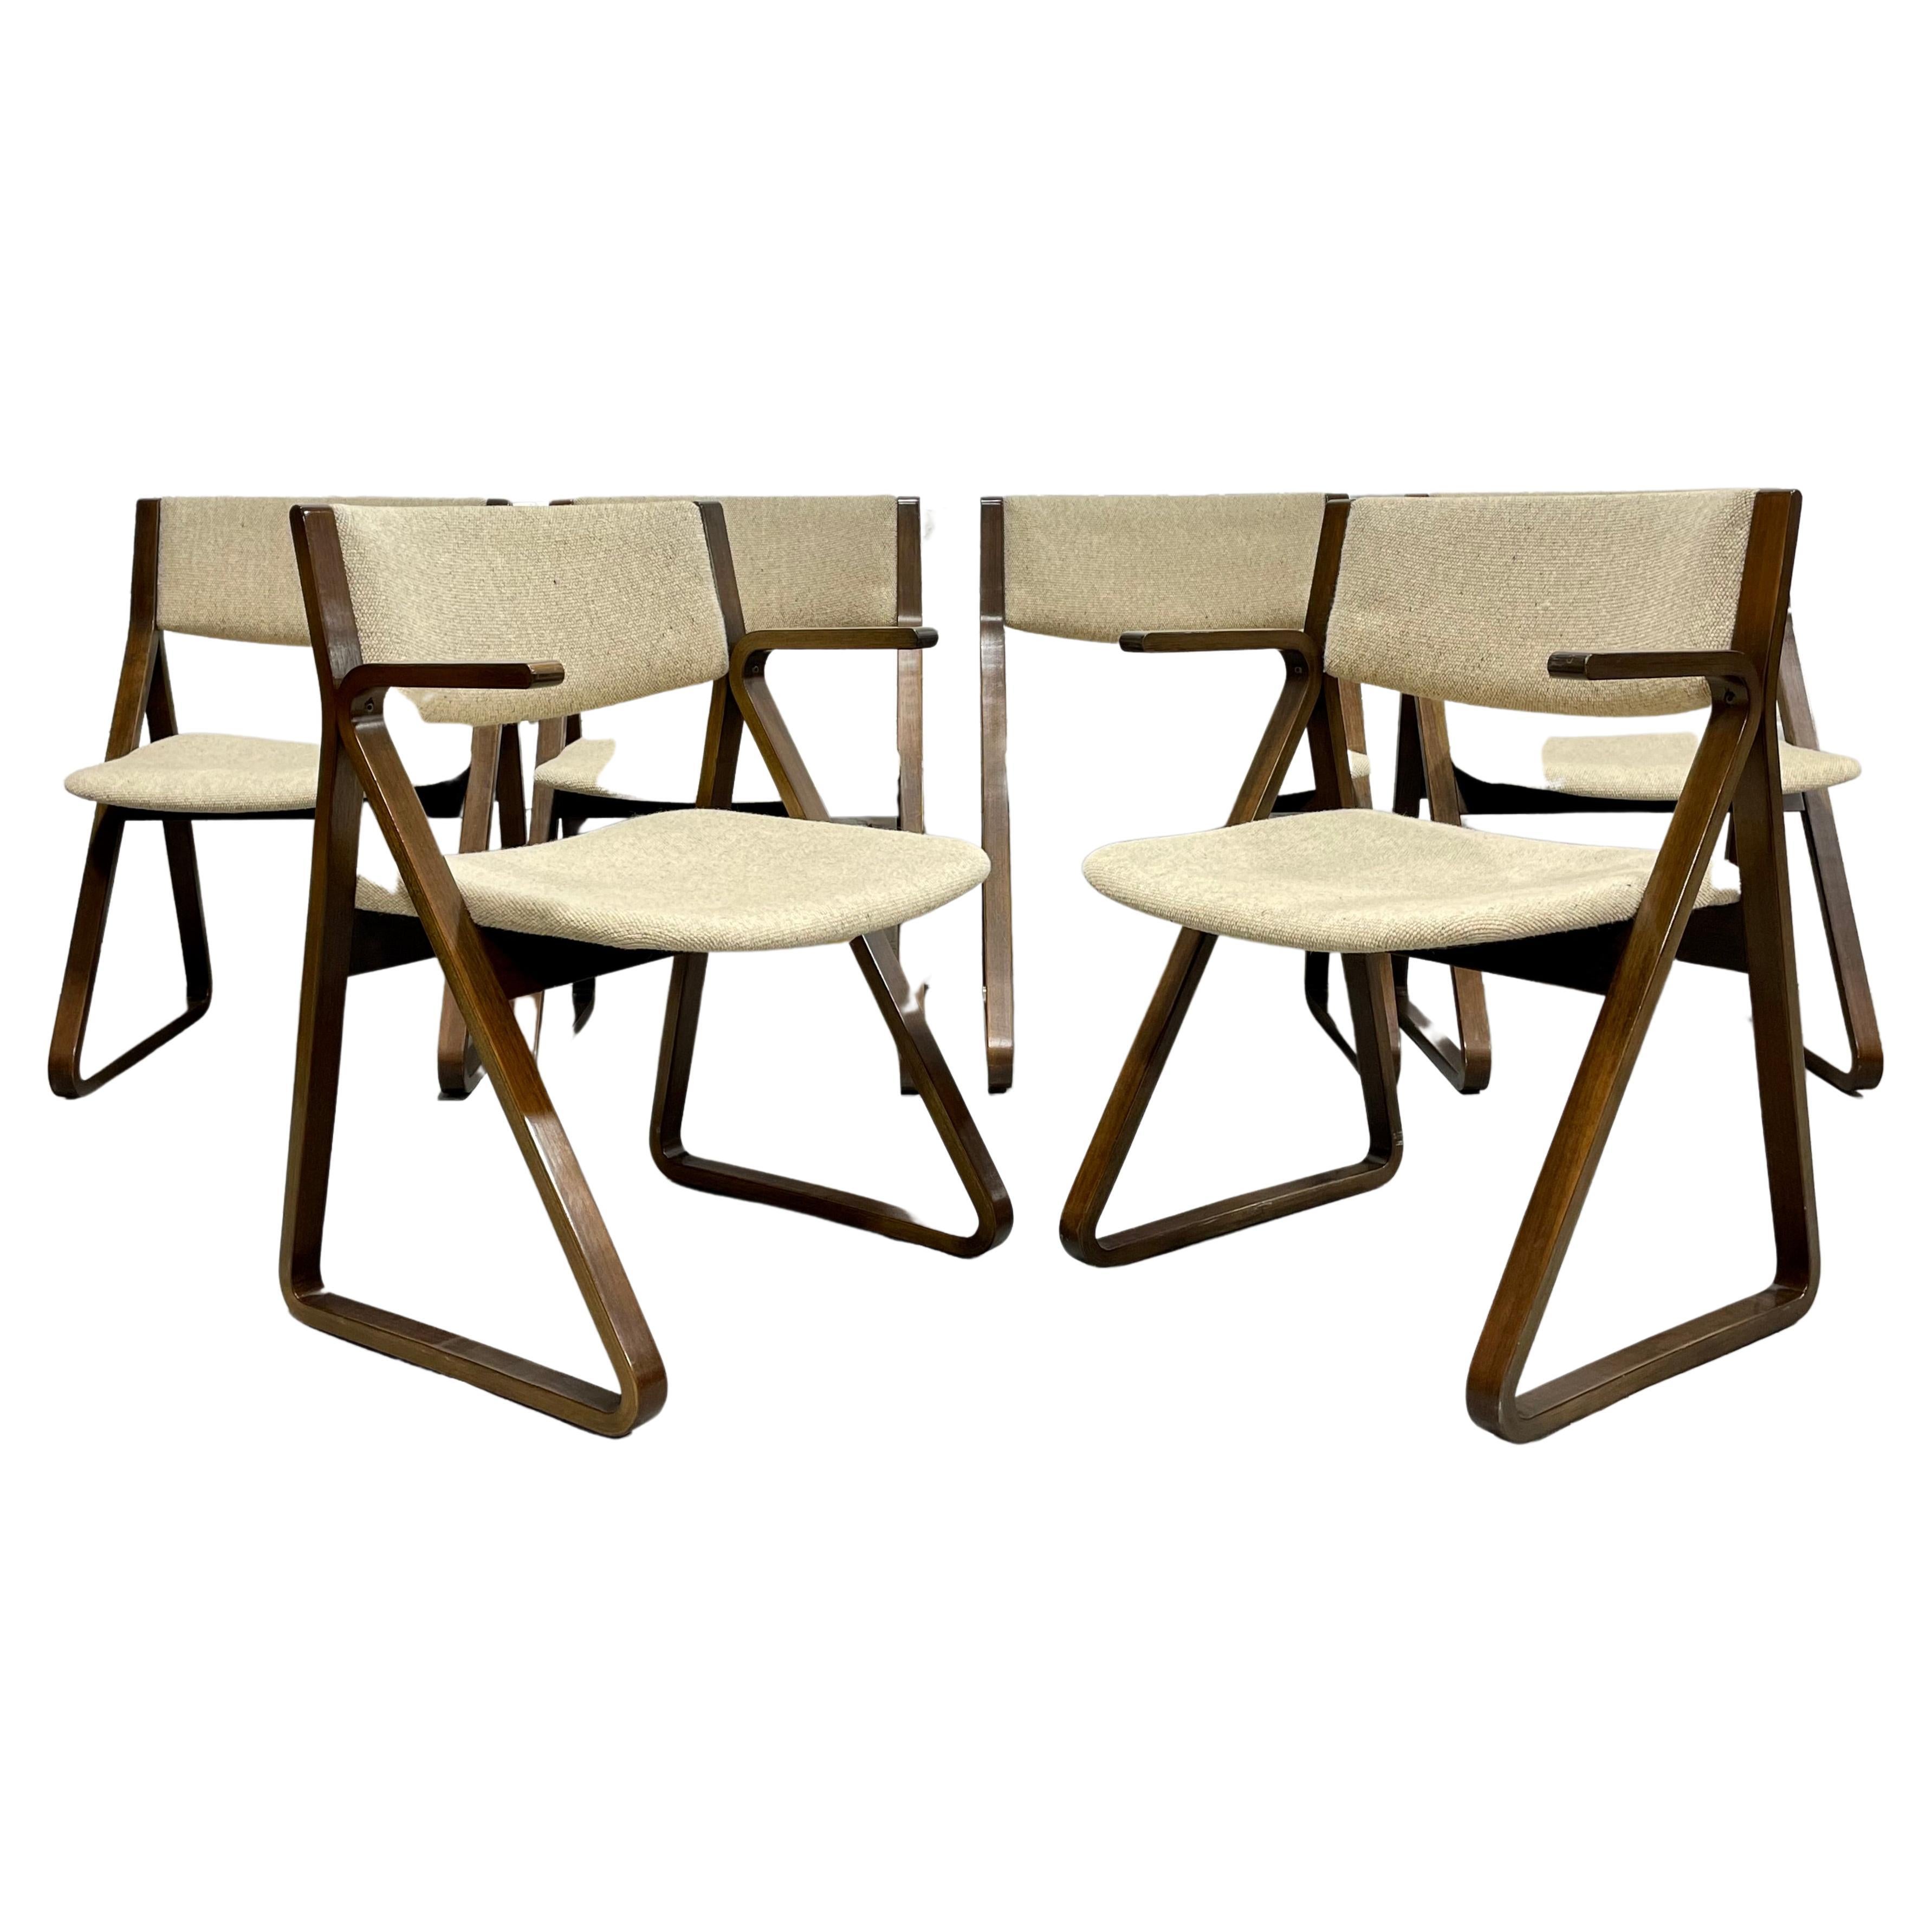 Rare Mid-Century Modern “Triangle” Dining Chairs designed by Robert DeFuccio for Stow Davis, set of six. The triangular profile of the chairs is incredible and the oatmeal colored upholstery contrasts beautifully with the darker walnut frames.